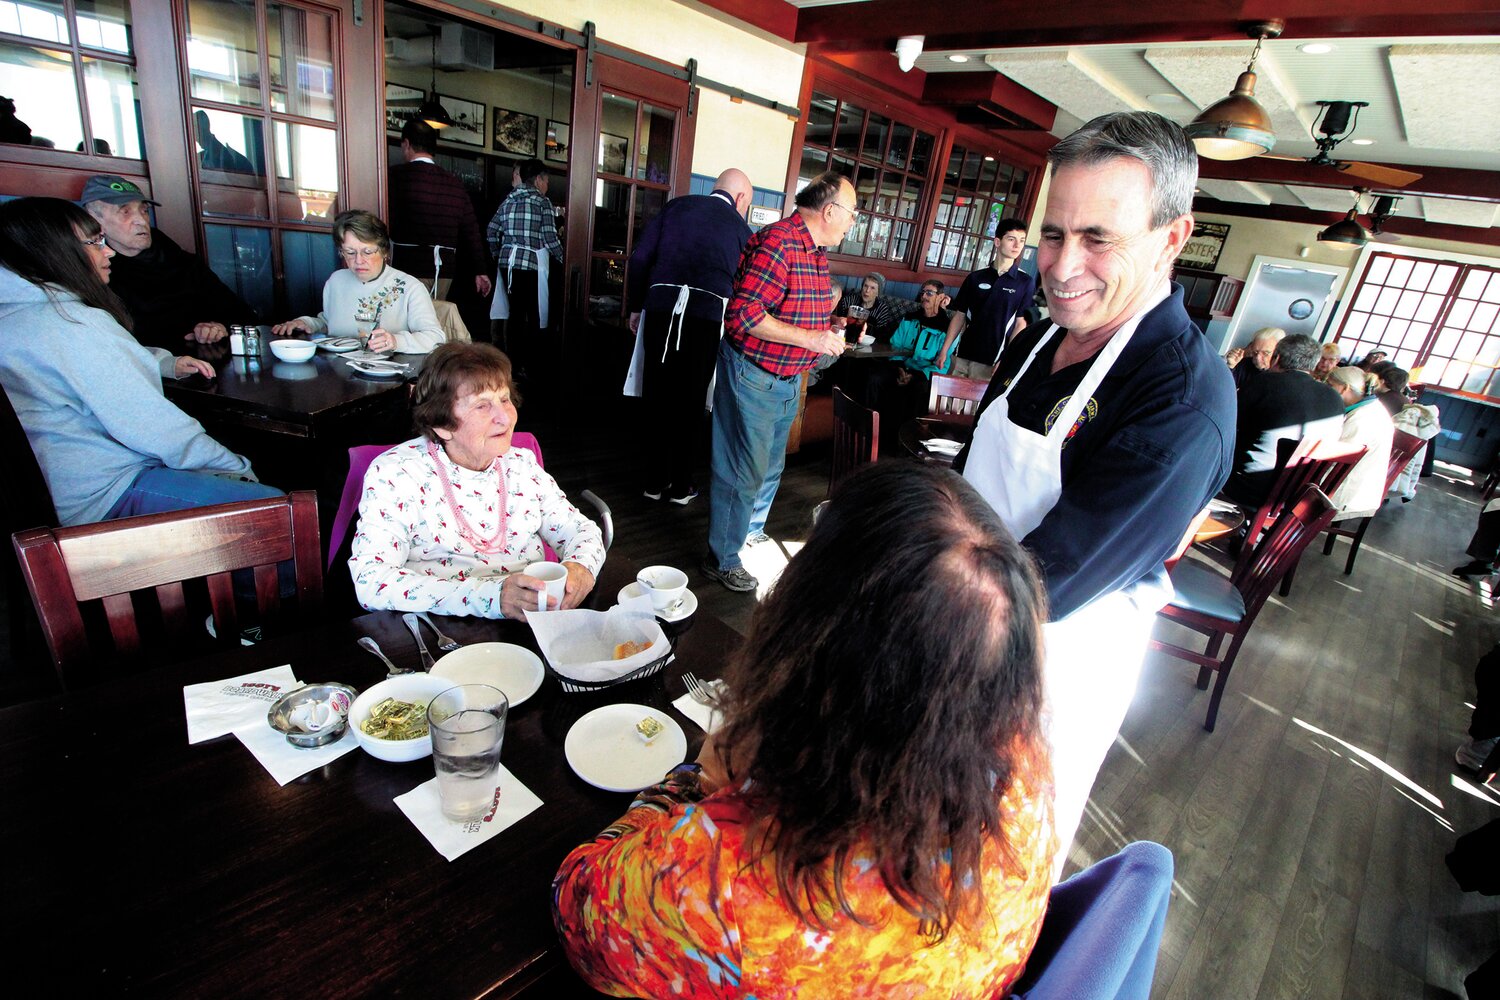 CHIT CHAT WITH THE MAYOR: Nancy Wunderler and her mother, Linda, who is a regular at the Pilgrim Senior Center get the low down from their waiter, Mayor Frank Picozzi.